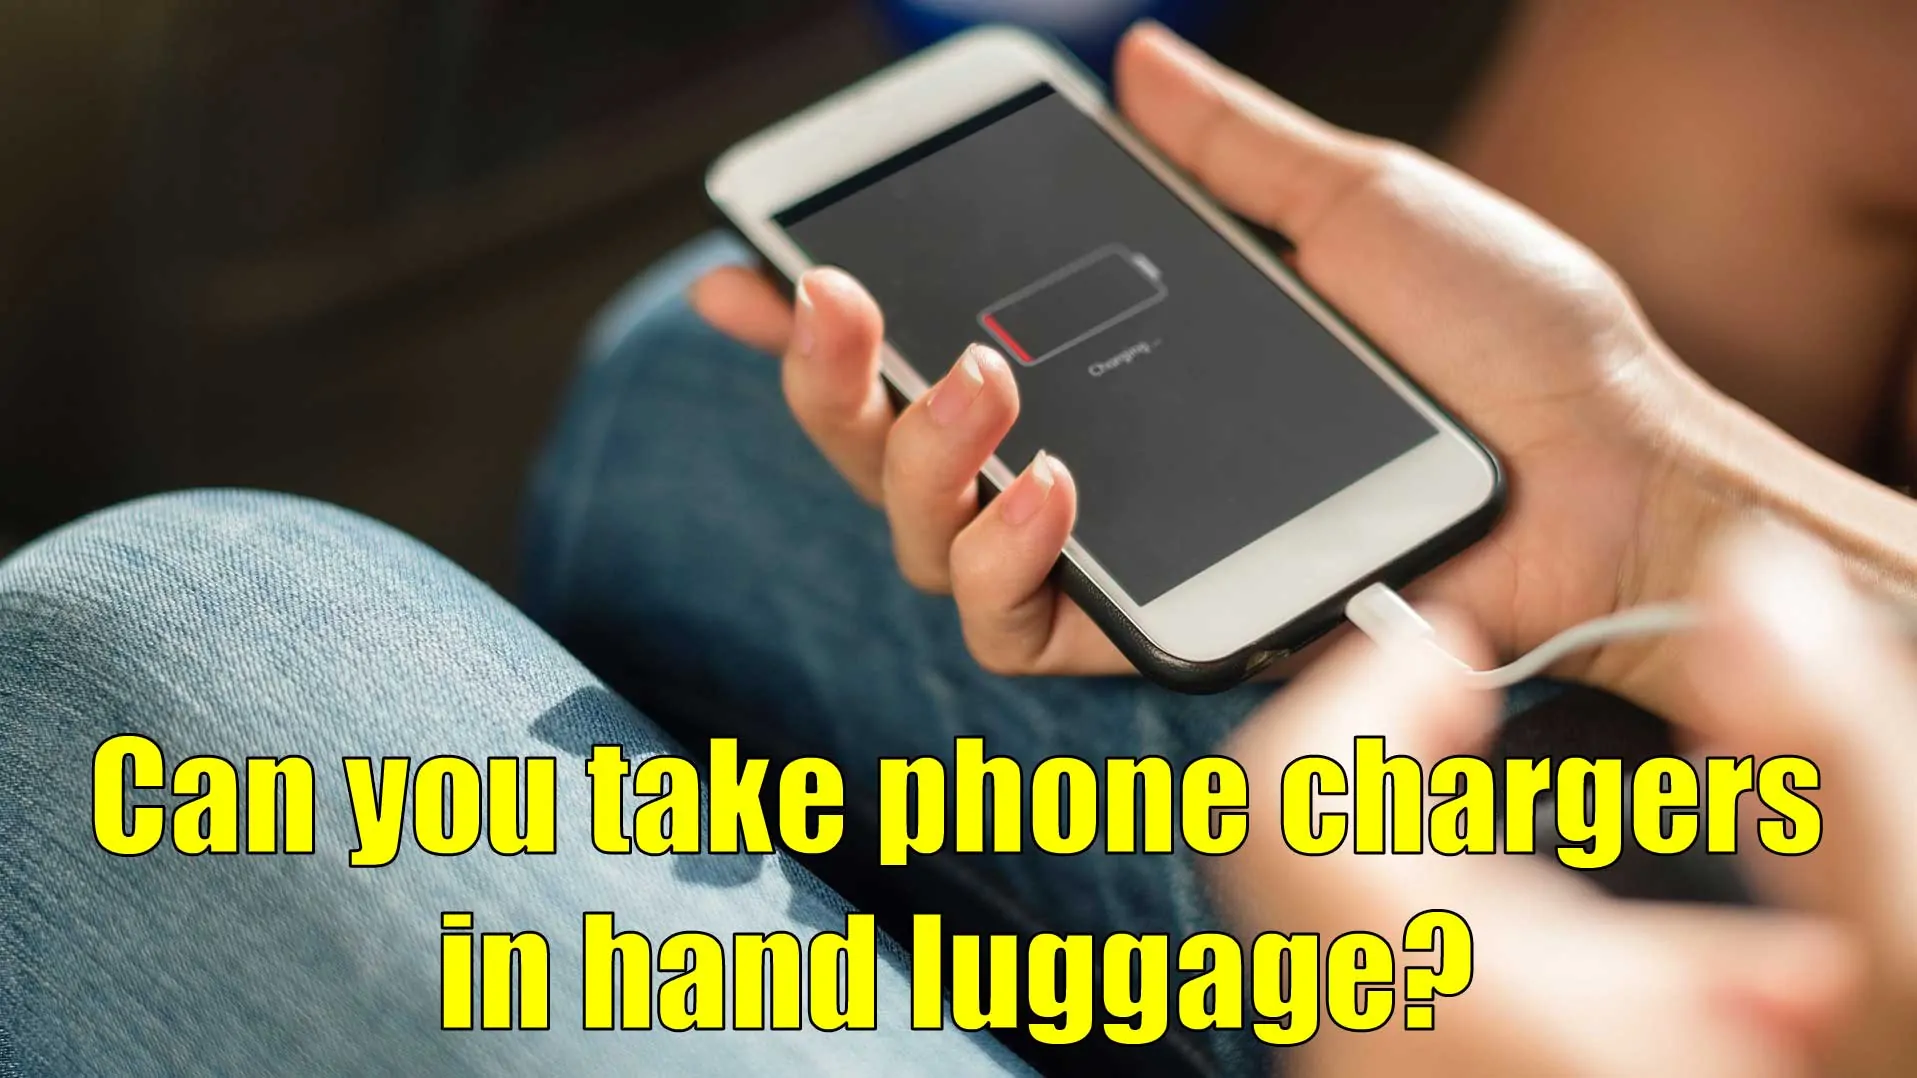 Can you take phone chargers in hand luggage?